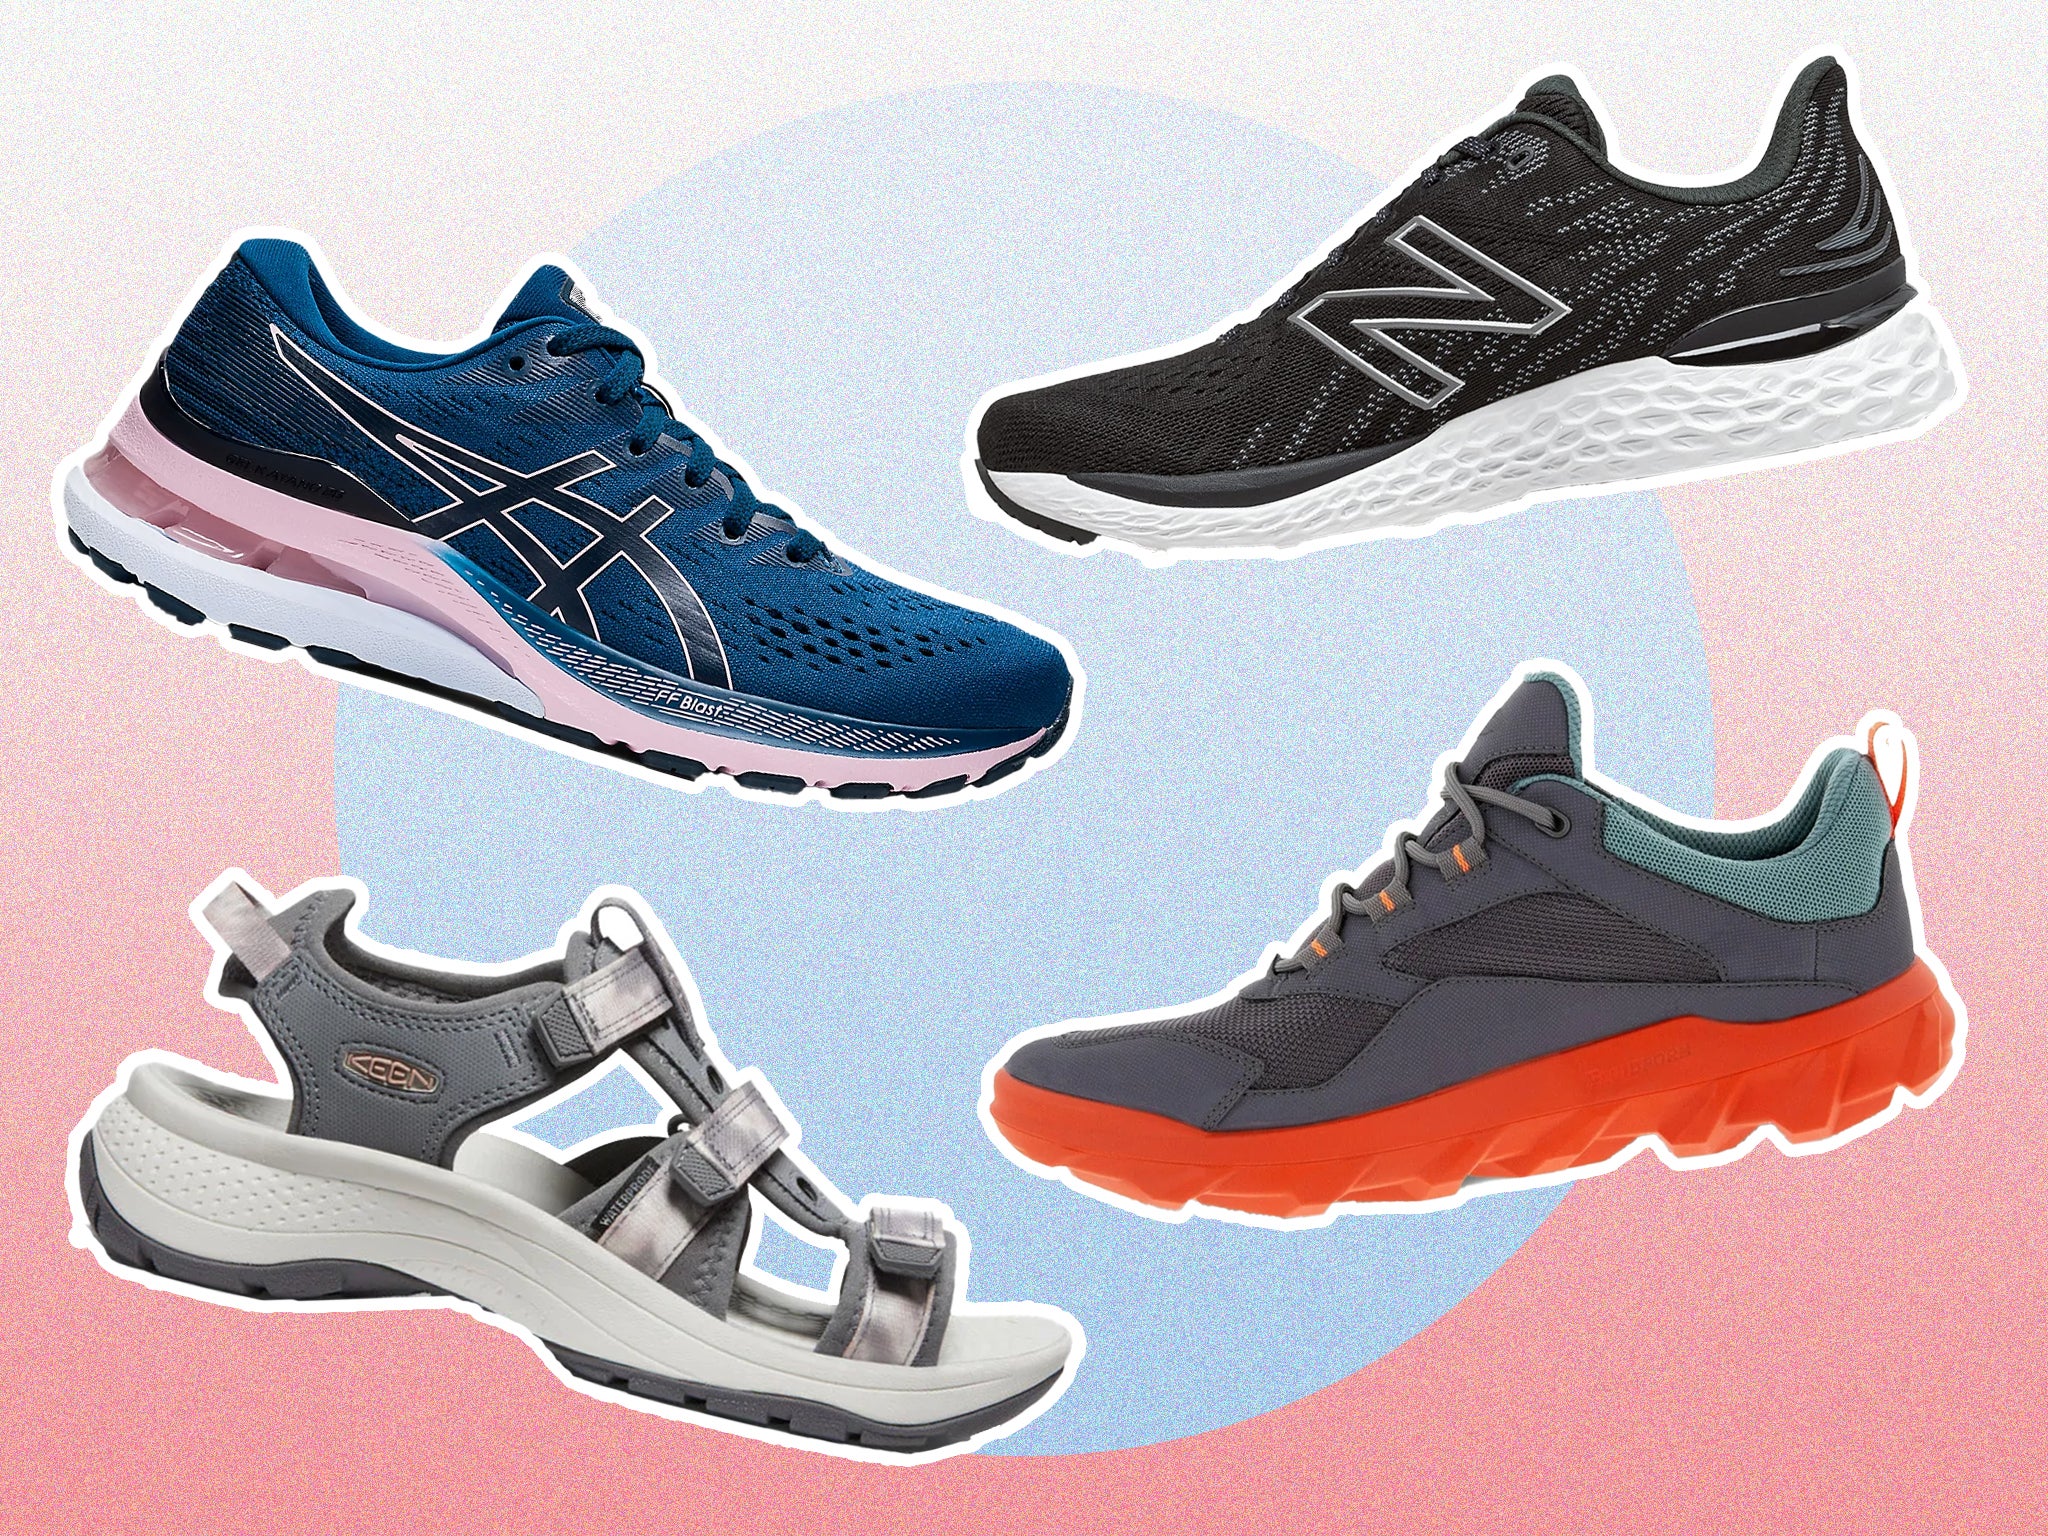 8 best orthopaedic and supportive shoes that don’t compromise on style